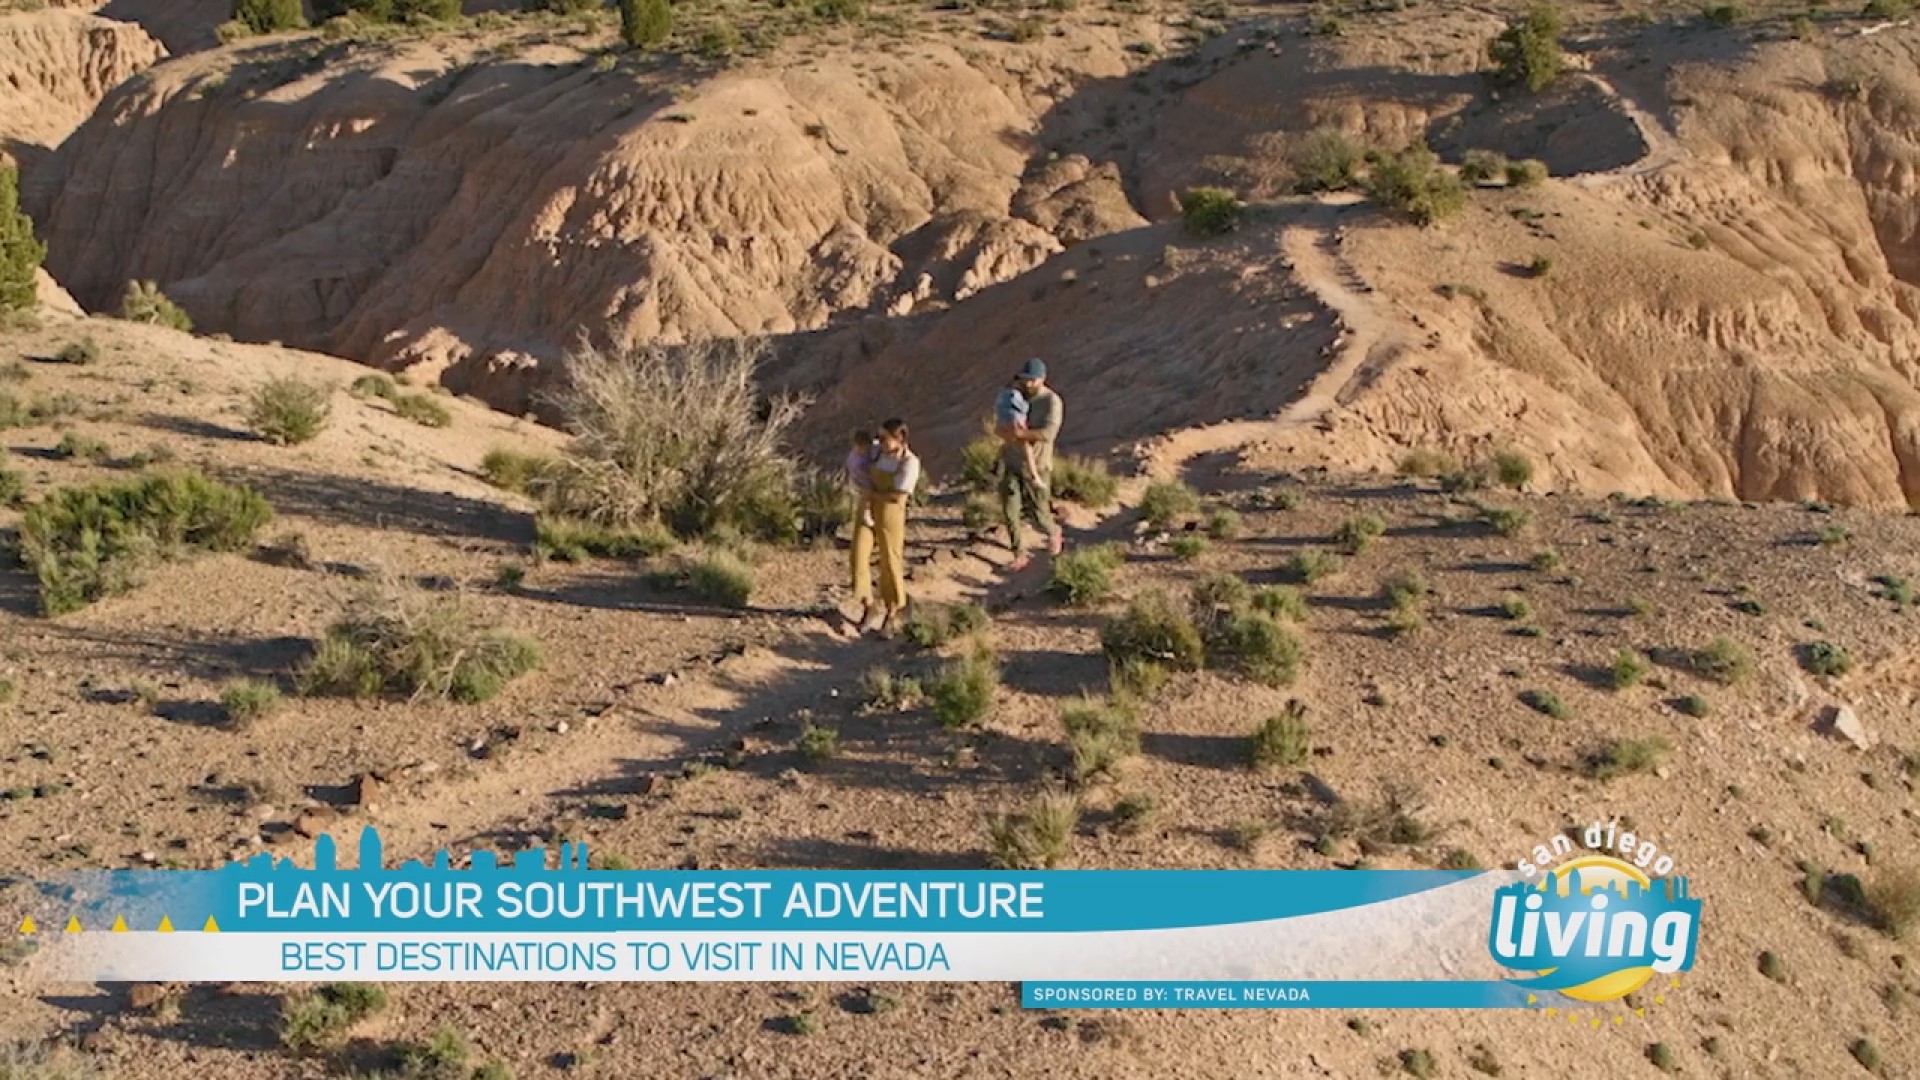 Explore Nevada’s Unique Landscape and Natural Wonders. Sponsored by: Travel Nevada